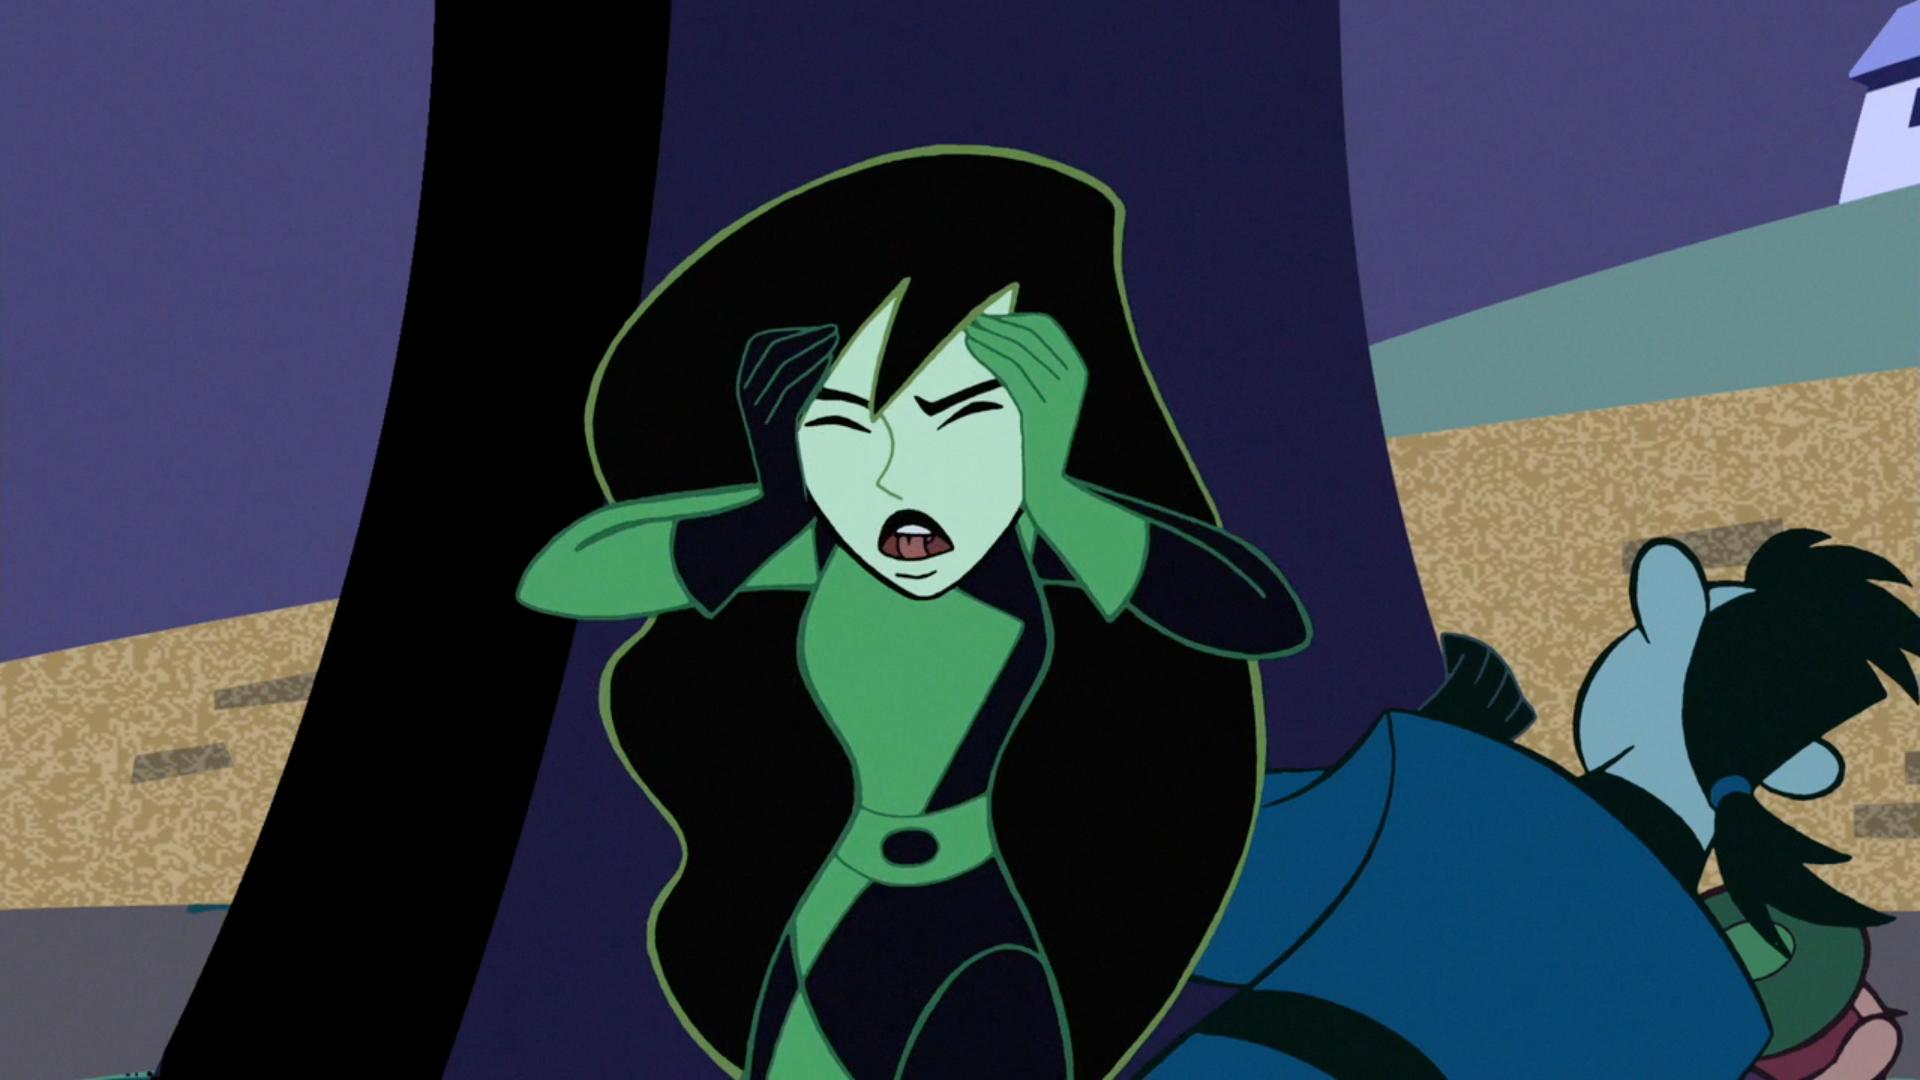 Kim learns that the ancient artifact is a time monkey, and Shego has used i...